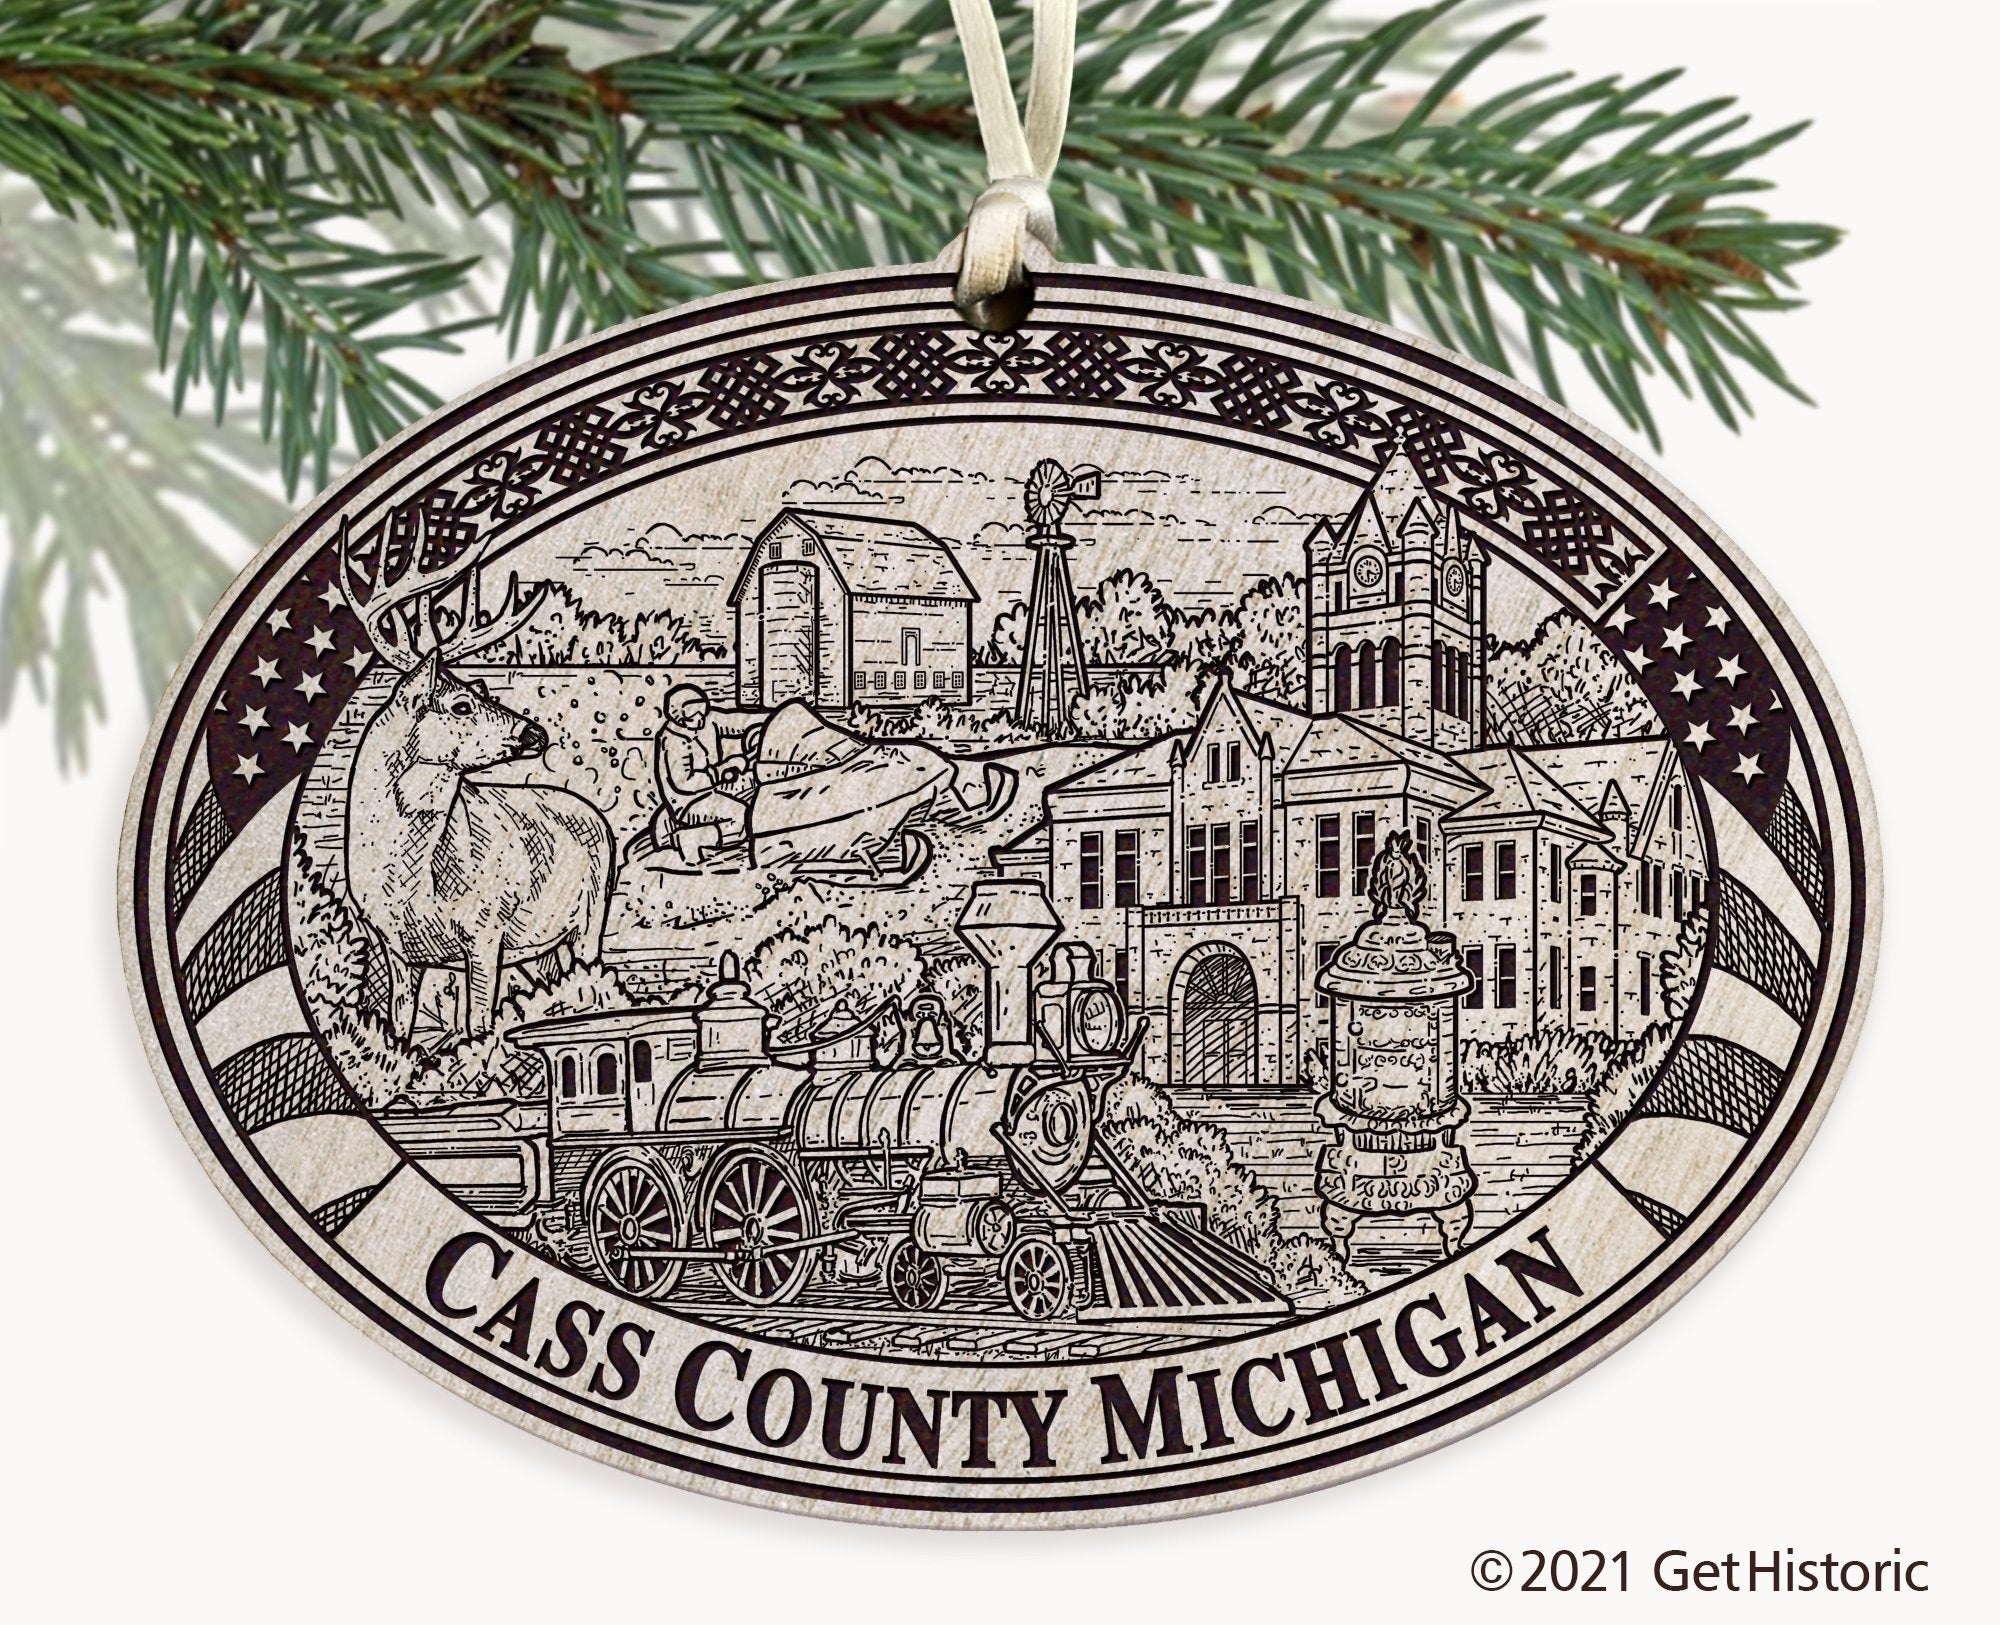 Cass County Michigan Engraved Ornament